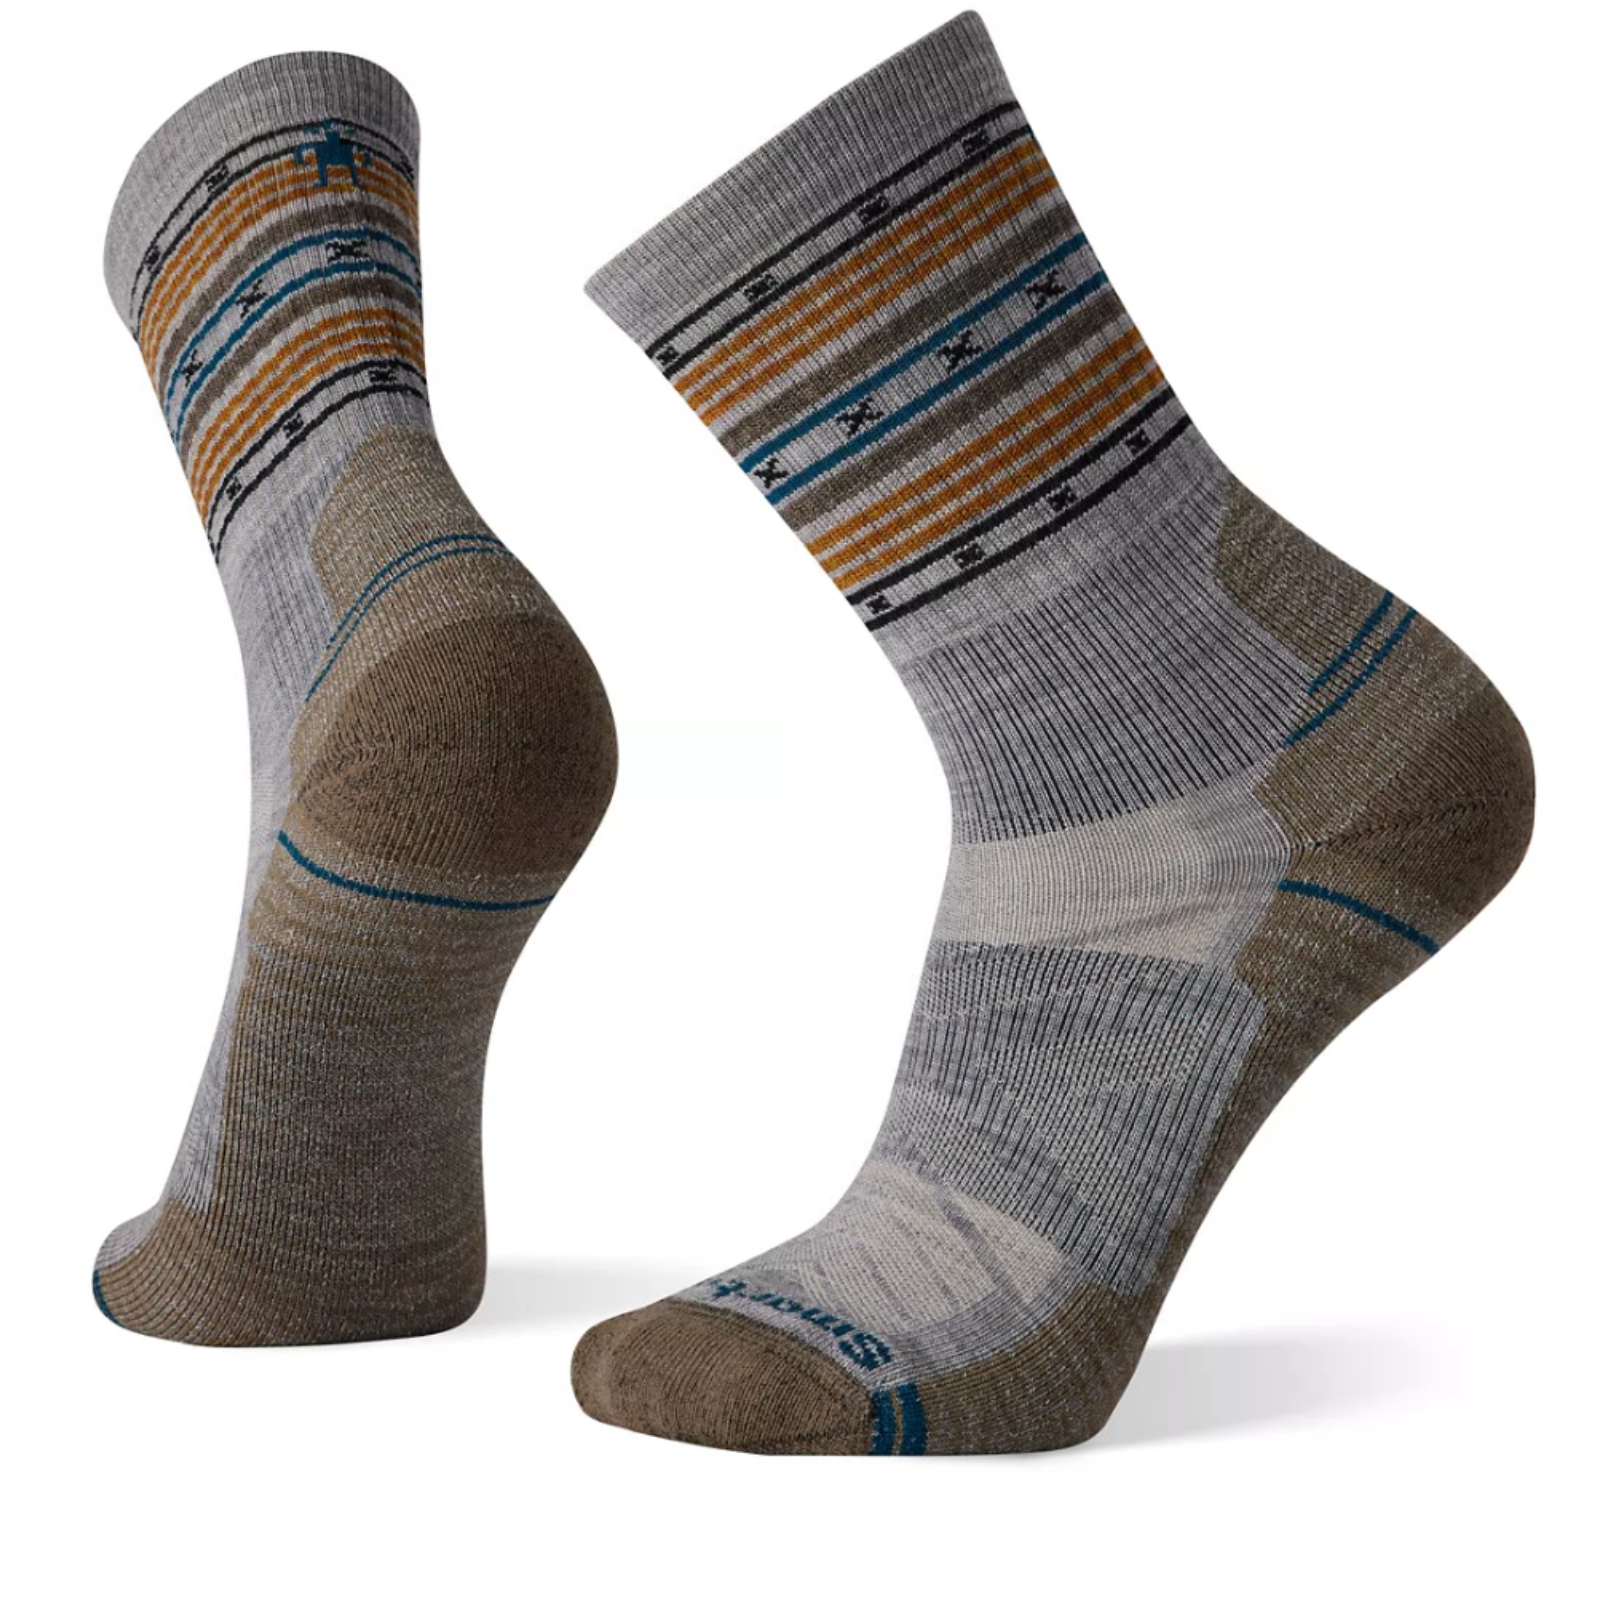 Smartwool Spiked Stripe Hike Light Cushion Crew men's crew sock featuring light gray sock with black, brown, and olive pattern. Socks shown on display feet from back and side.